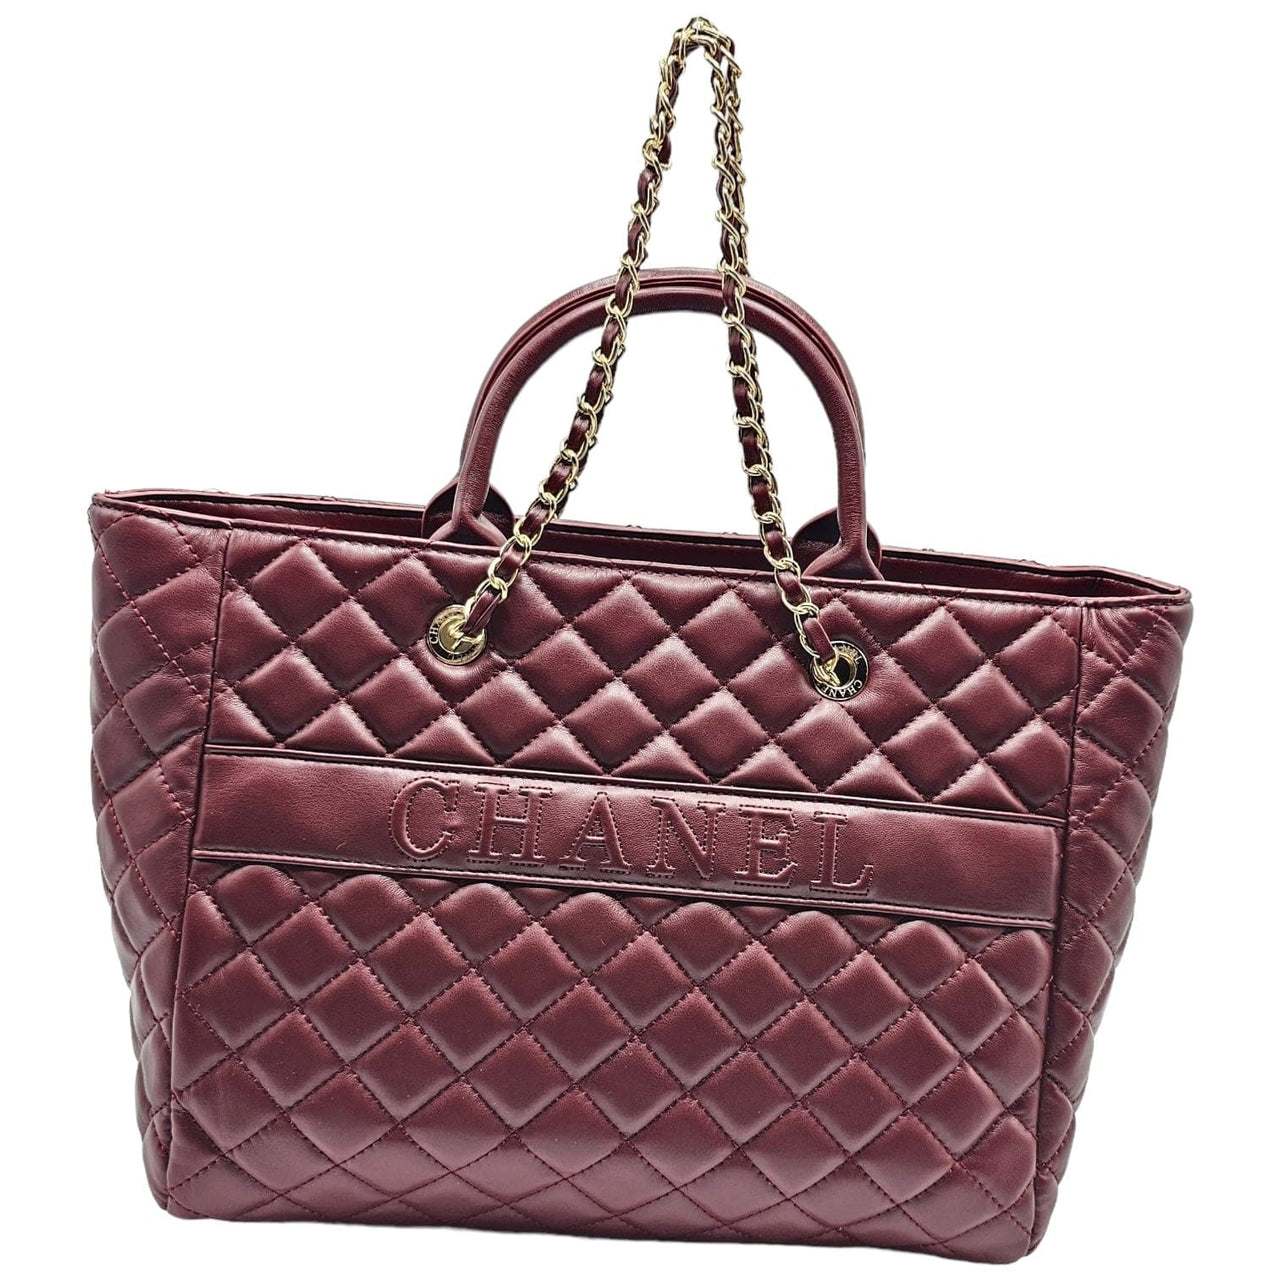 The Bag Couture Handbags, Wallets & Cases Chanel Bordeaux Quilted CC Charm Shoulder Bag Maroon